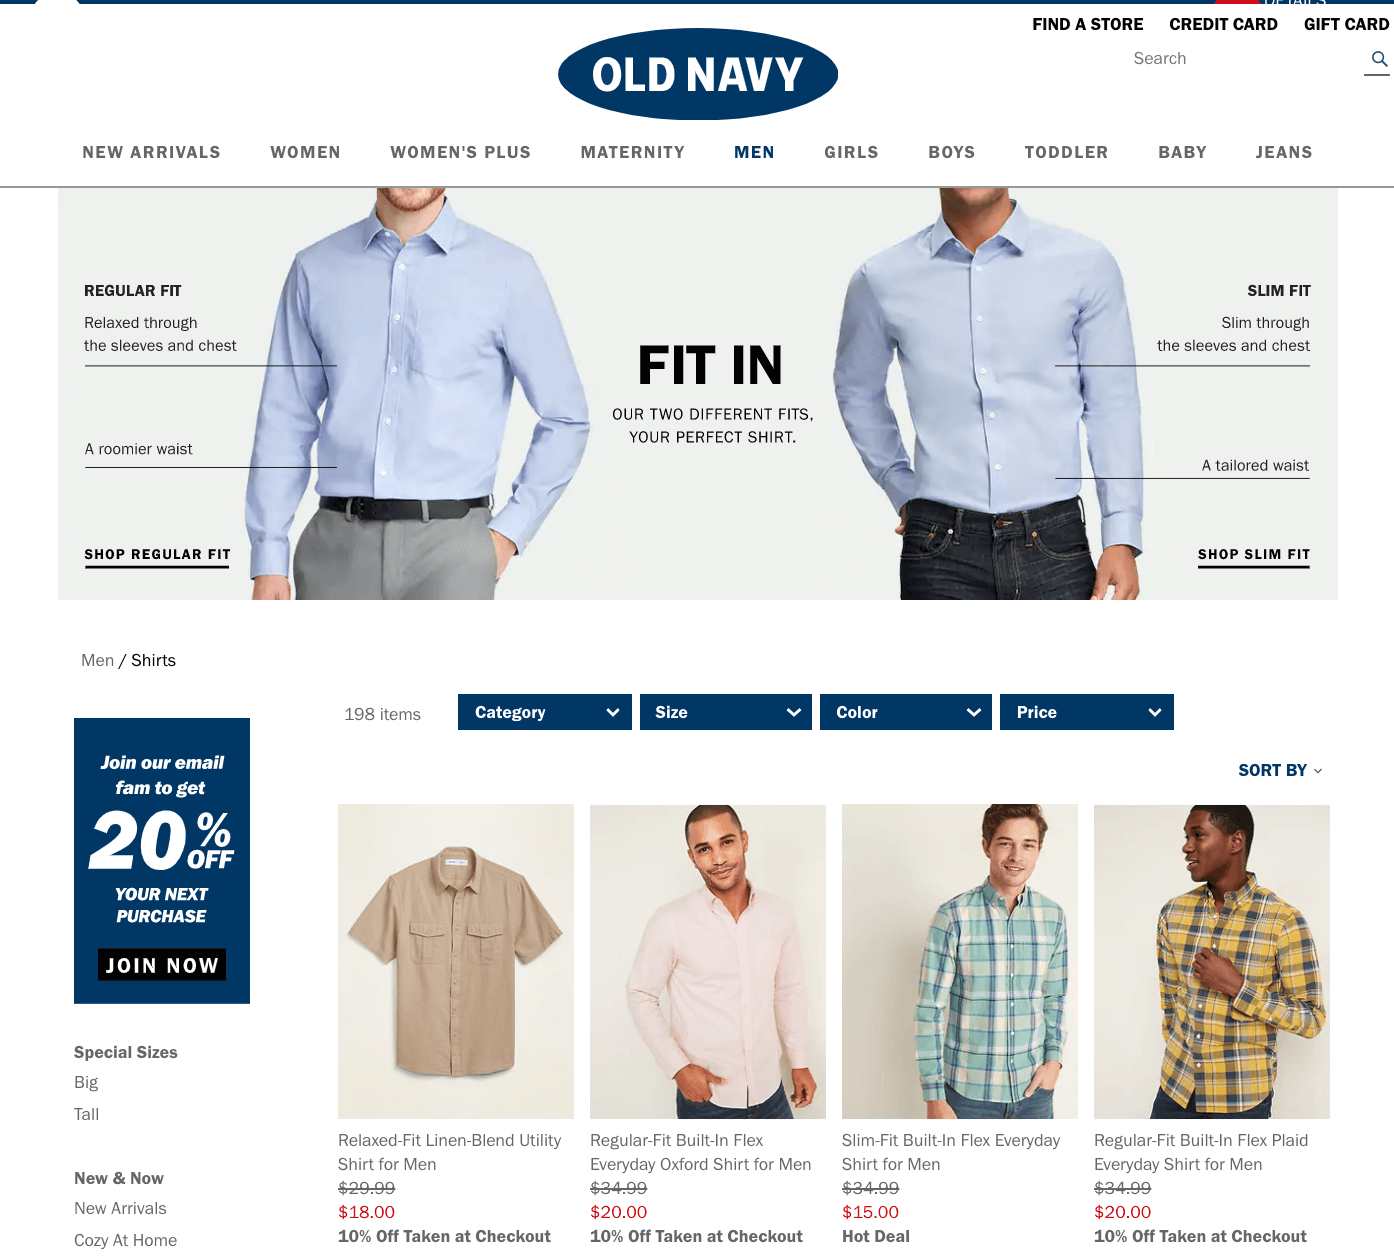 old navy collection image description